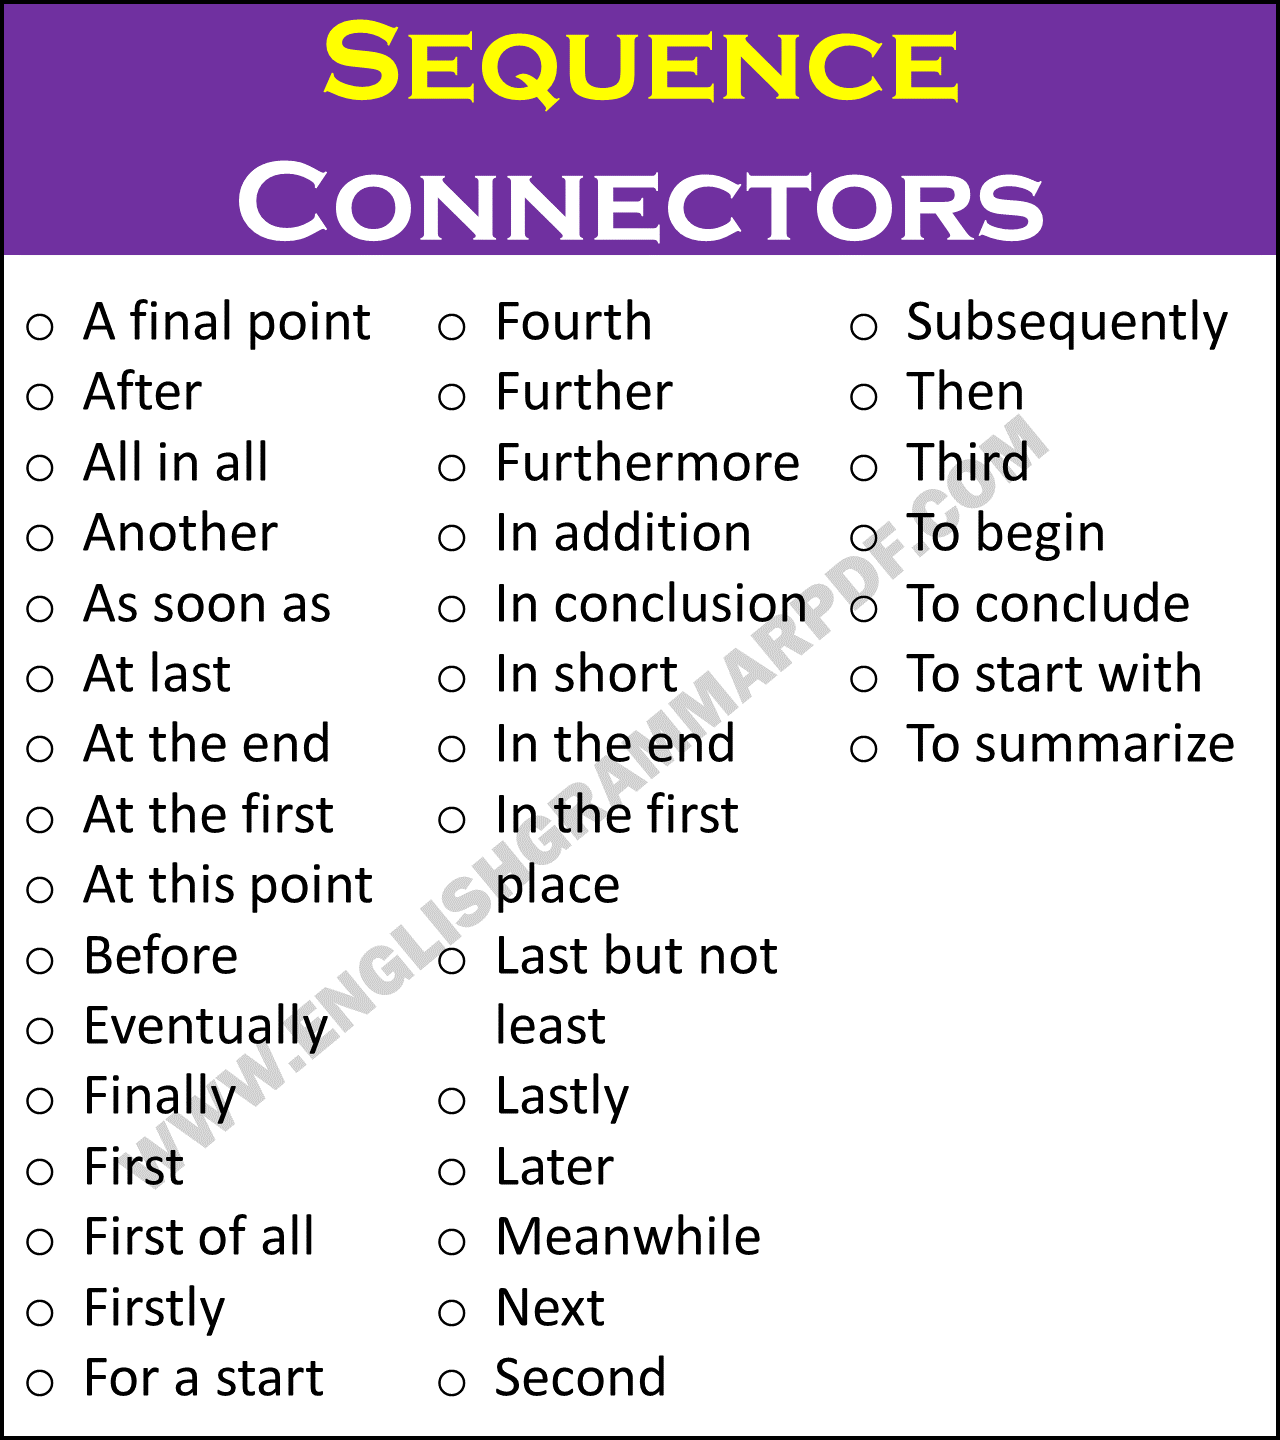 Sequence Connectors